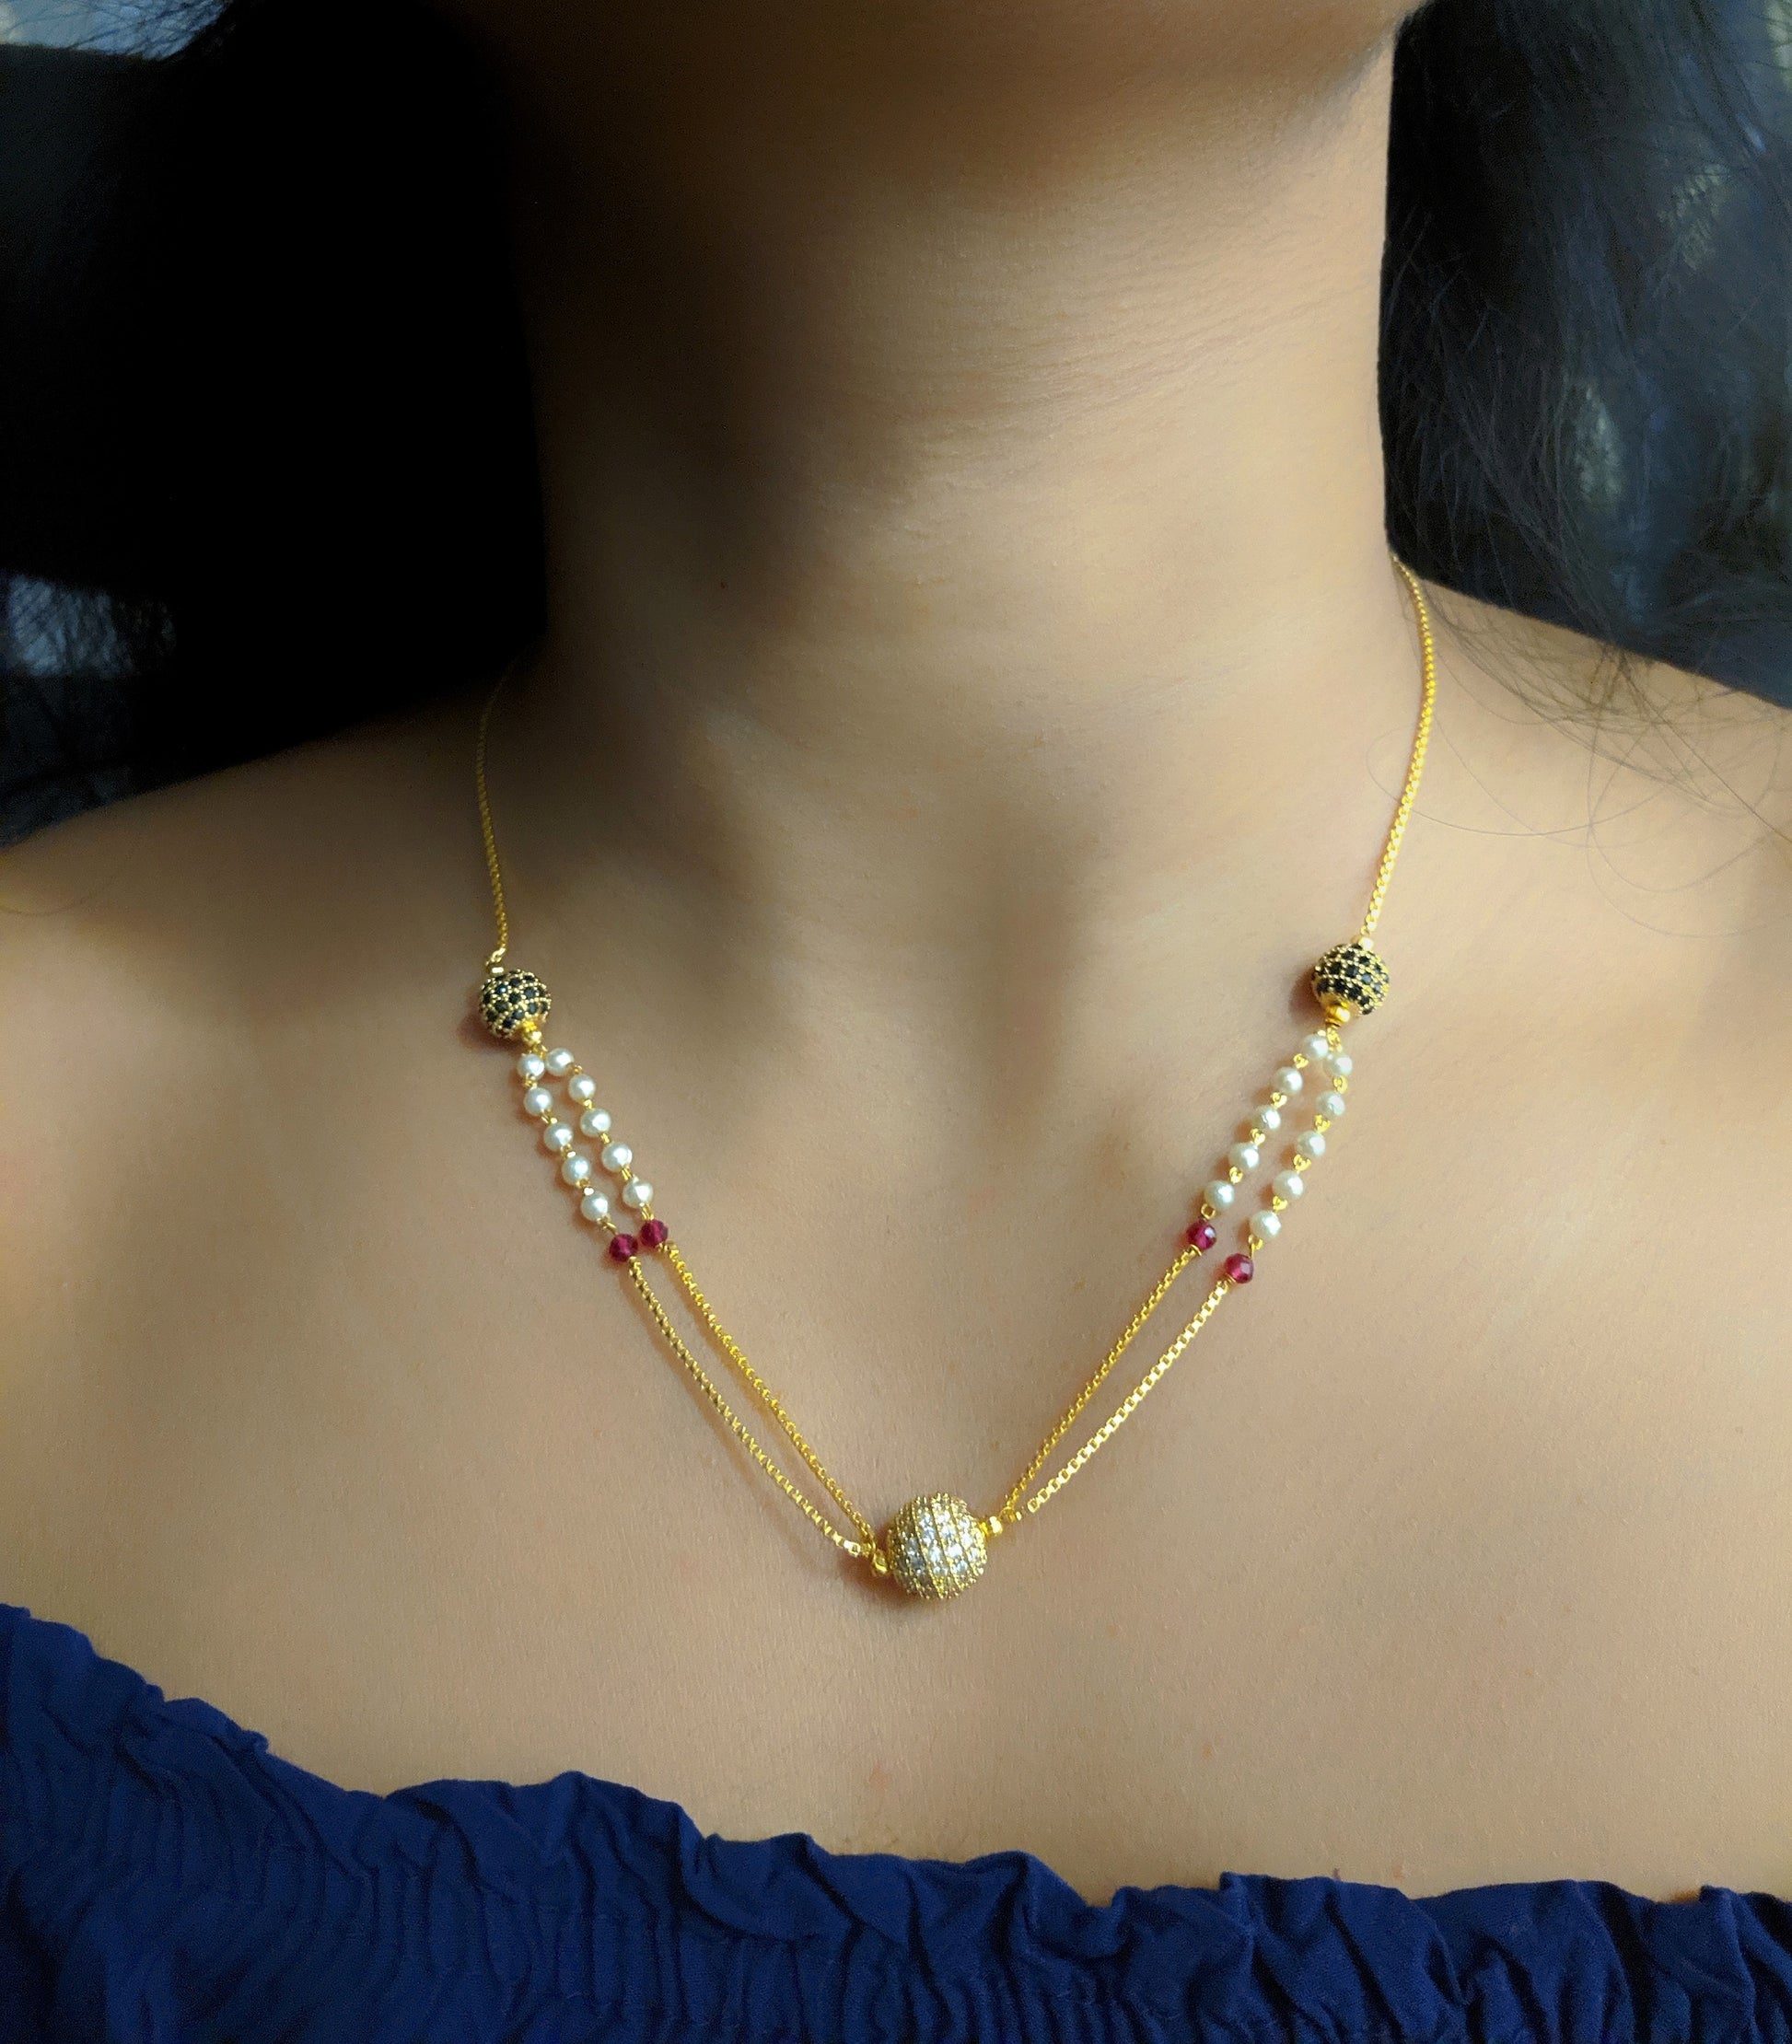 Digital Dress Room Latest Short Necklace Designs in Gold Finish Diamond Round Balls Layer Necklace